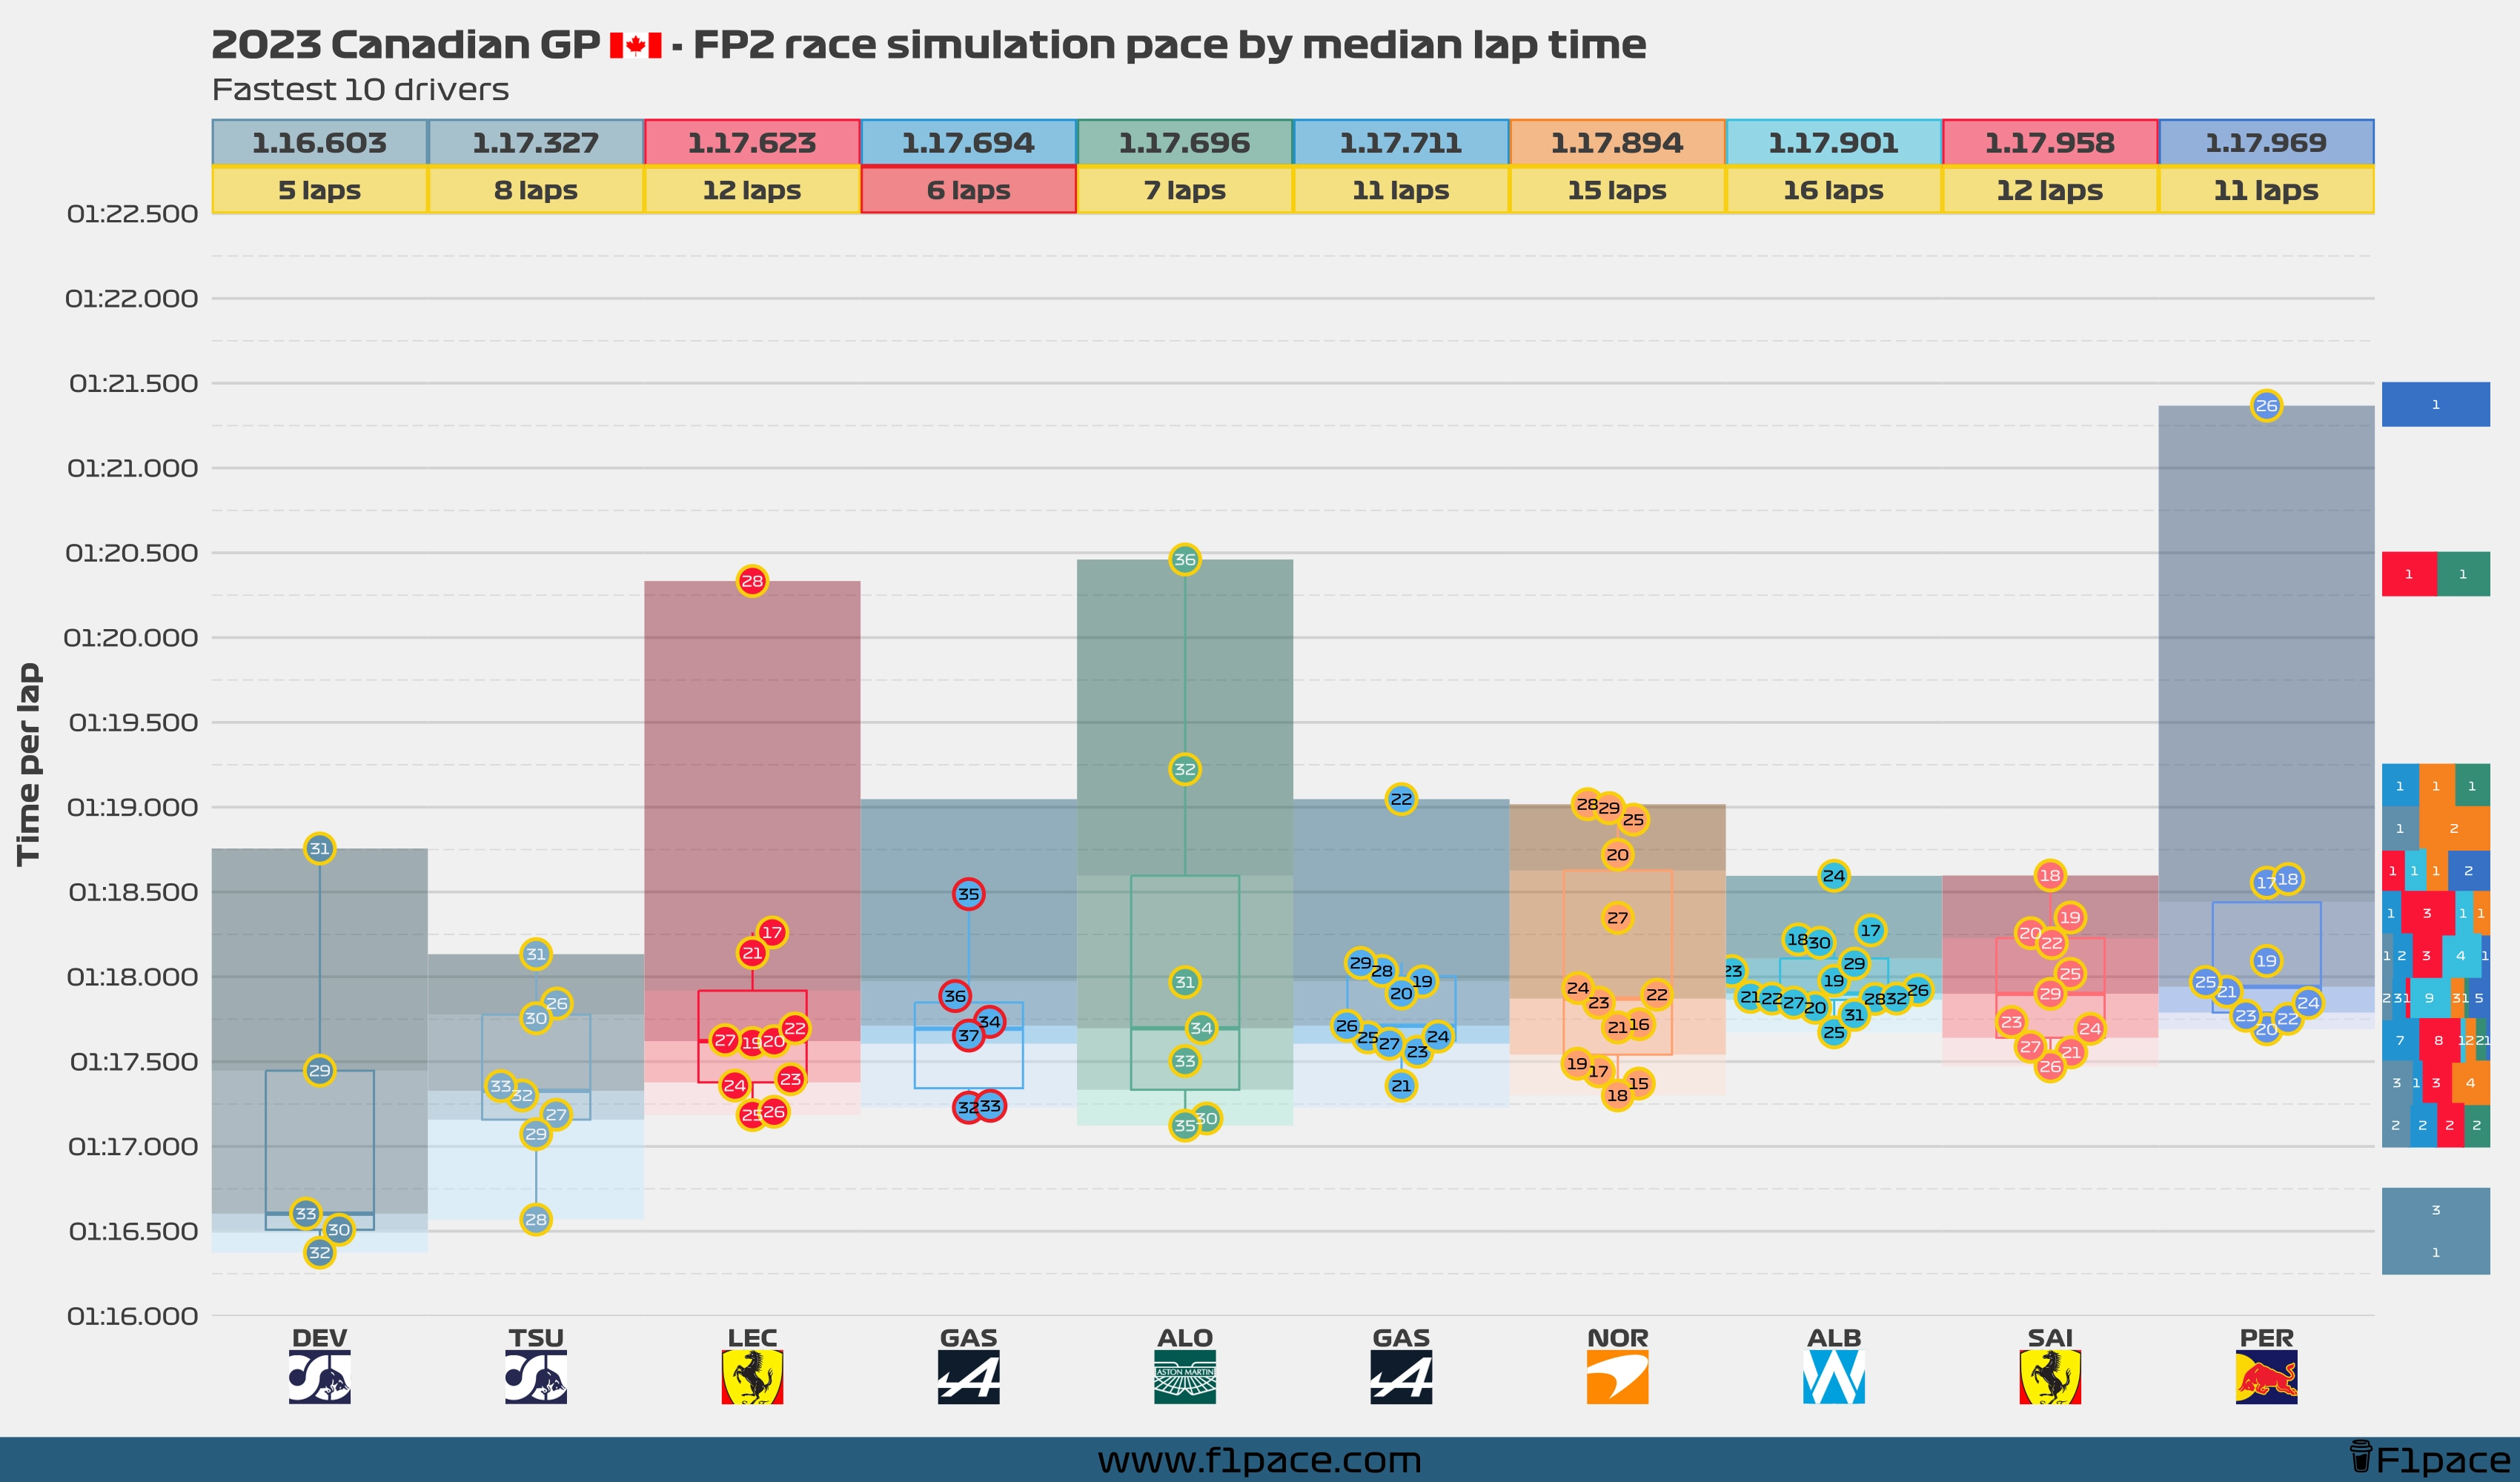 Race simulation pace: Top 10 drivers